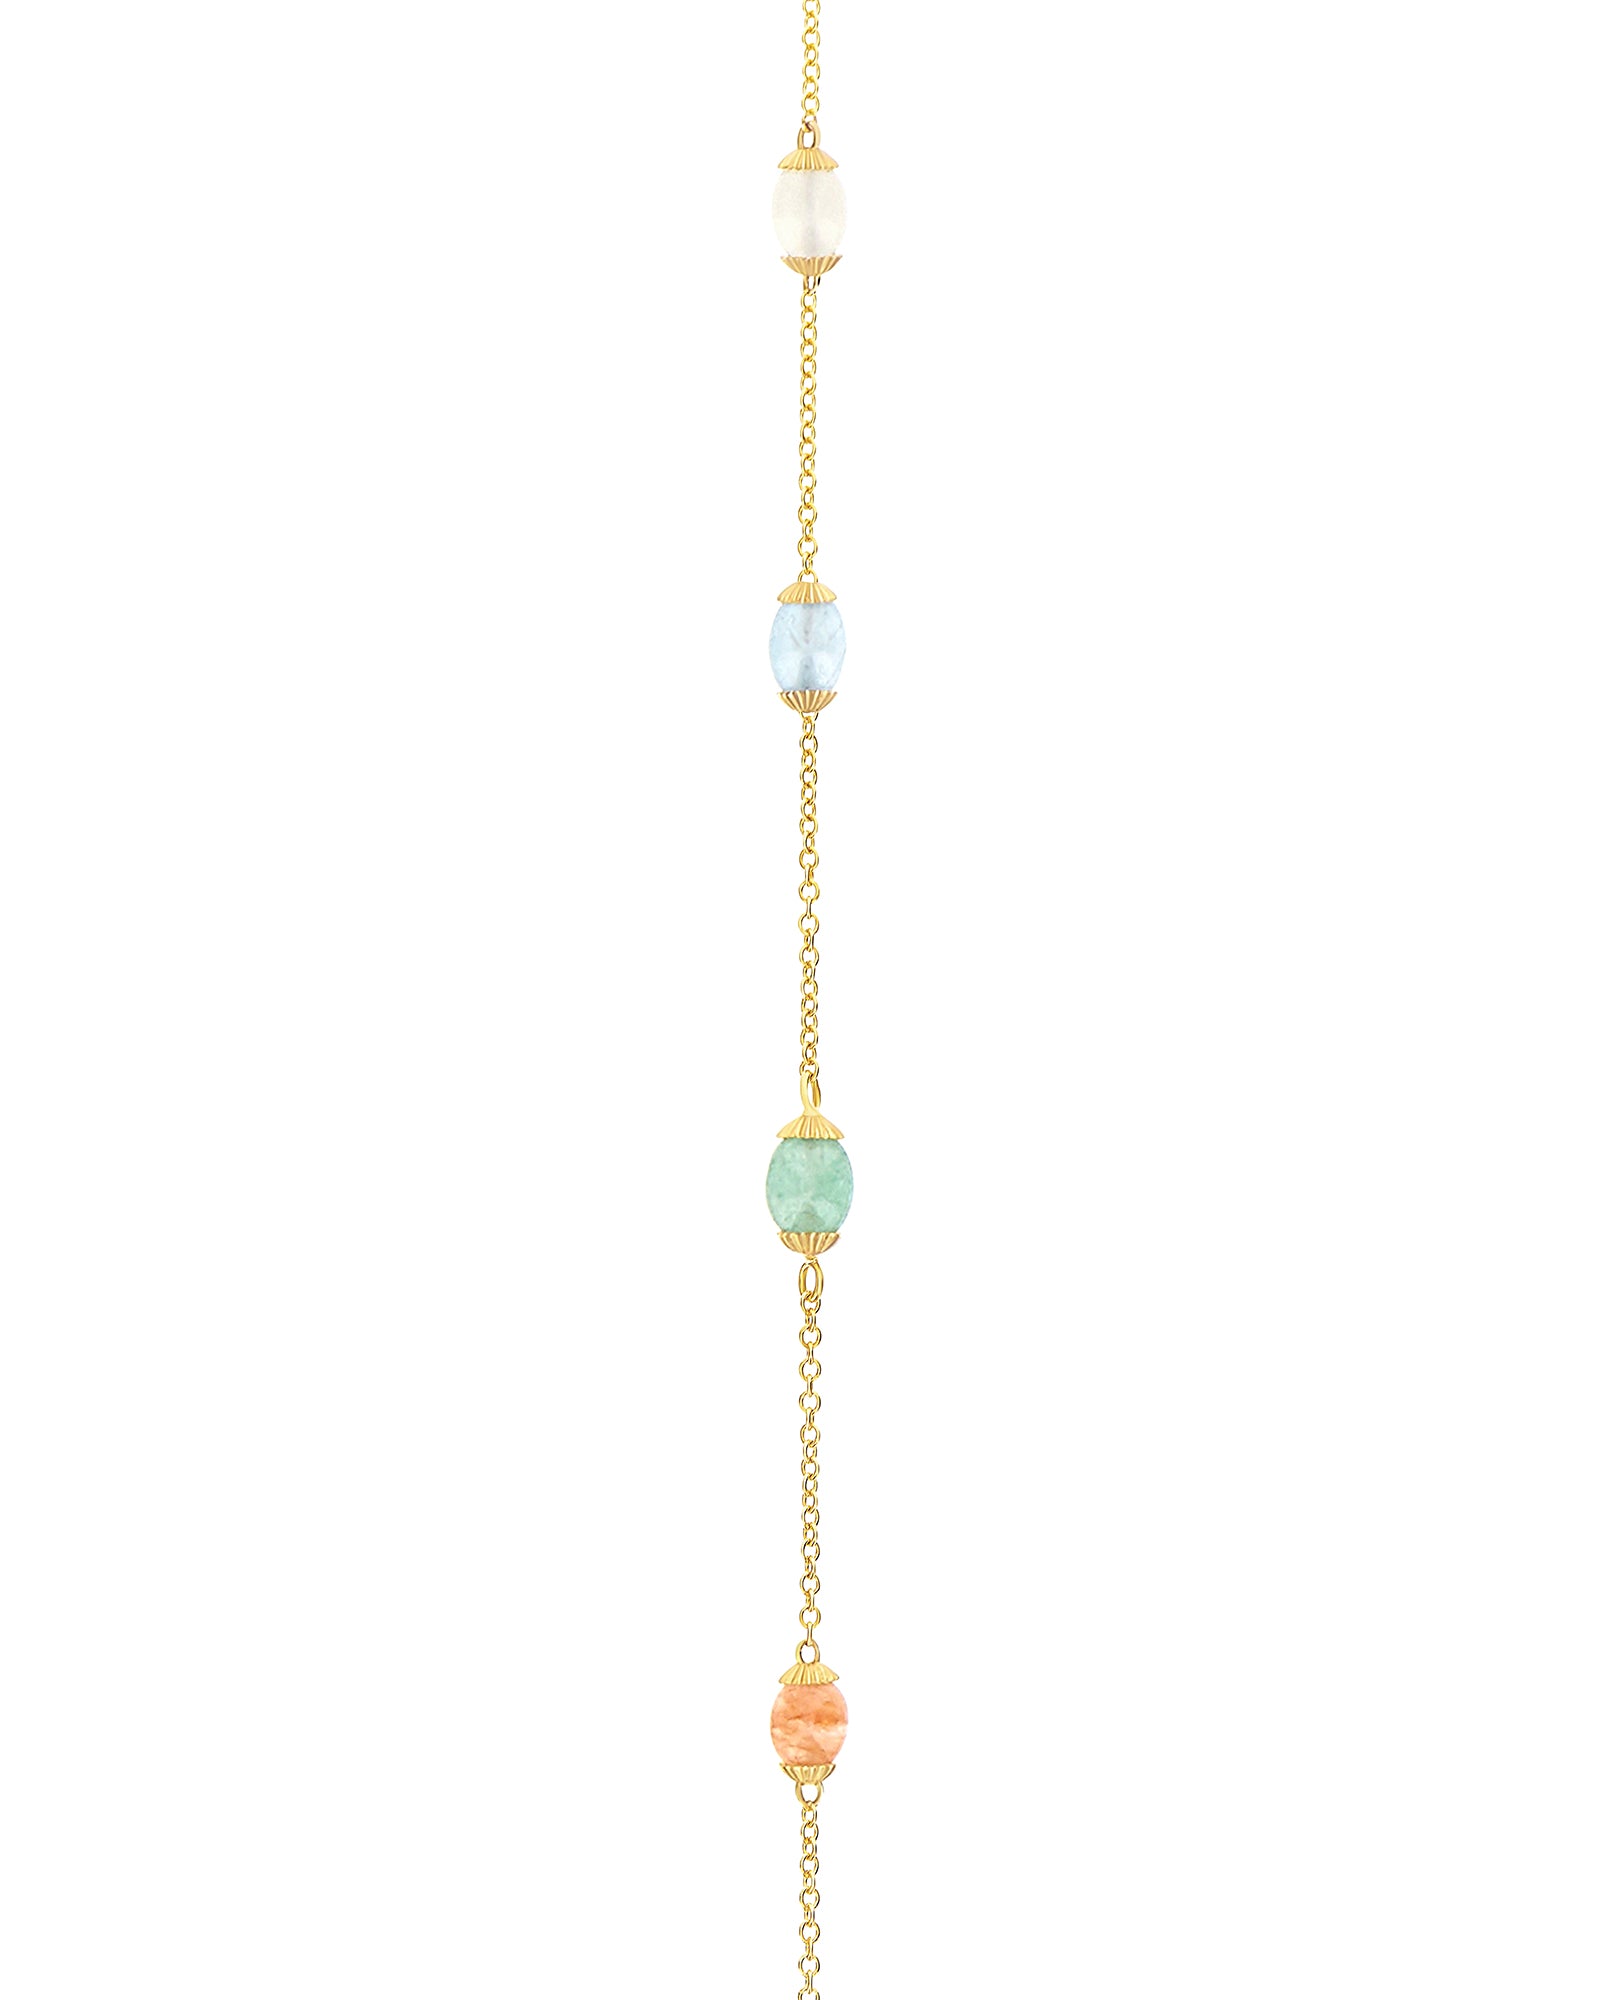 "Rainbow" Gold and Natural Stones Convertible Necklace (LARGE)